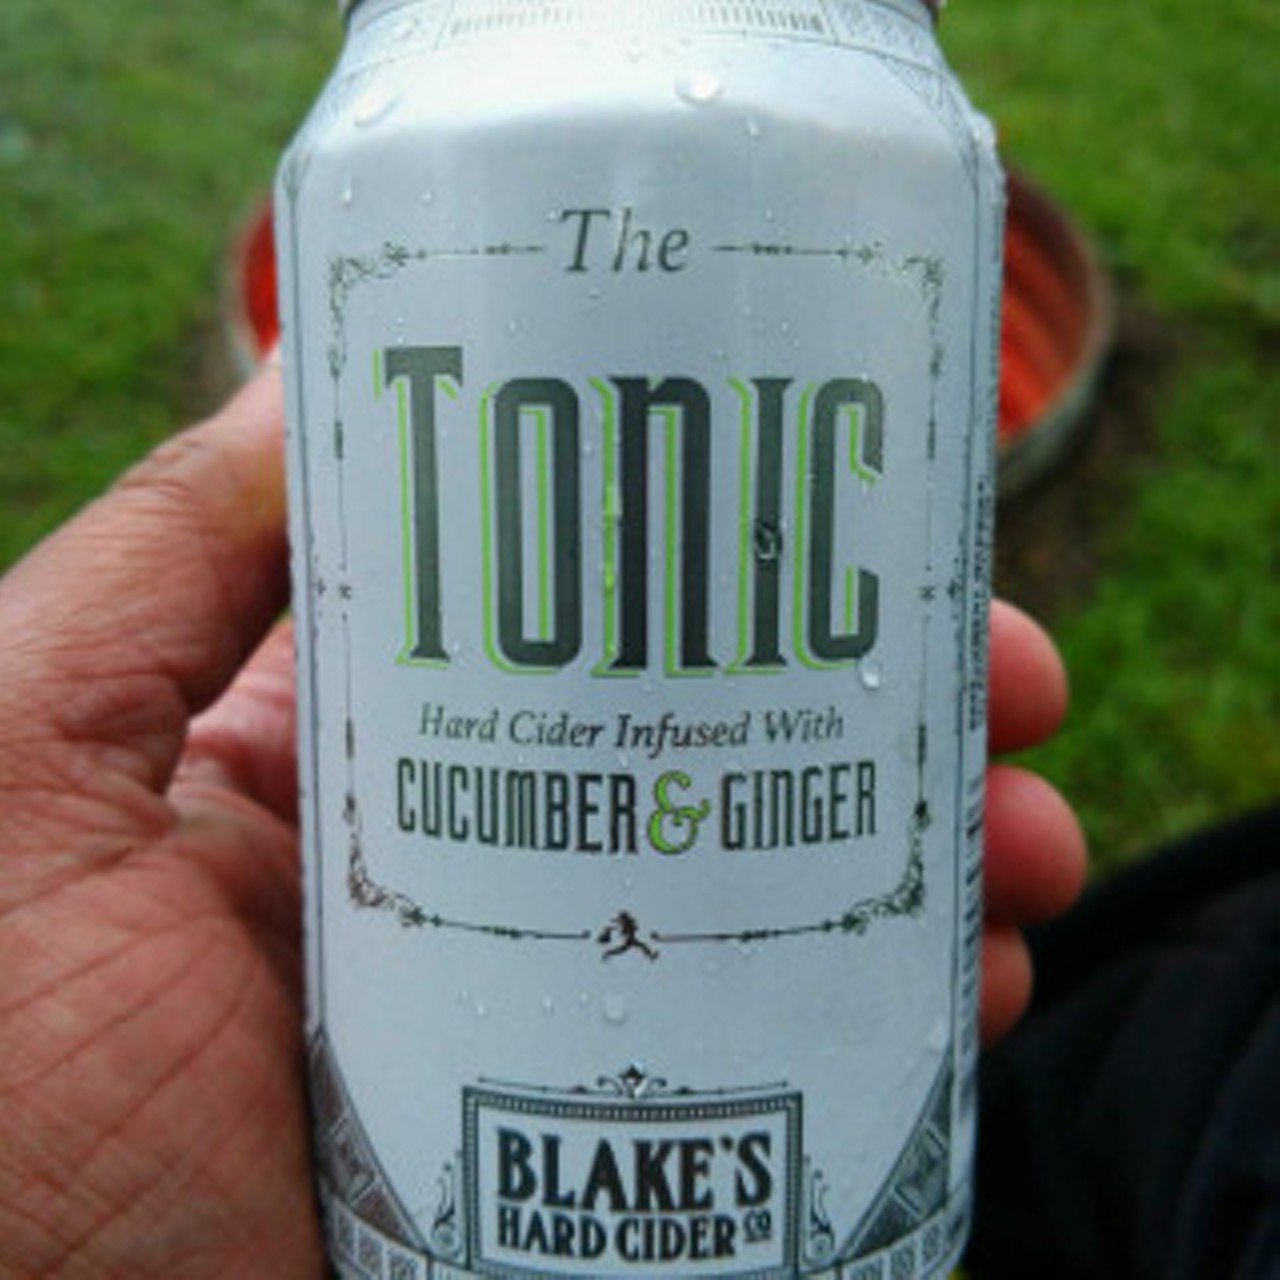 Tonic 
ABV: 6.5% 
Honestly, any of Blake's ciders are worth a try this summer &#151; they have a fantastic assortment of traditional ciders to fruity ones, but The Tonic is different from anything they have done before. Only available from April to July, The Tonic is brewed with ginger root and cucumber to give a refreshing and crisp cider.